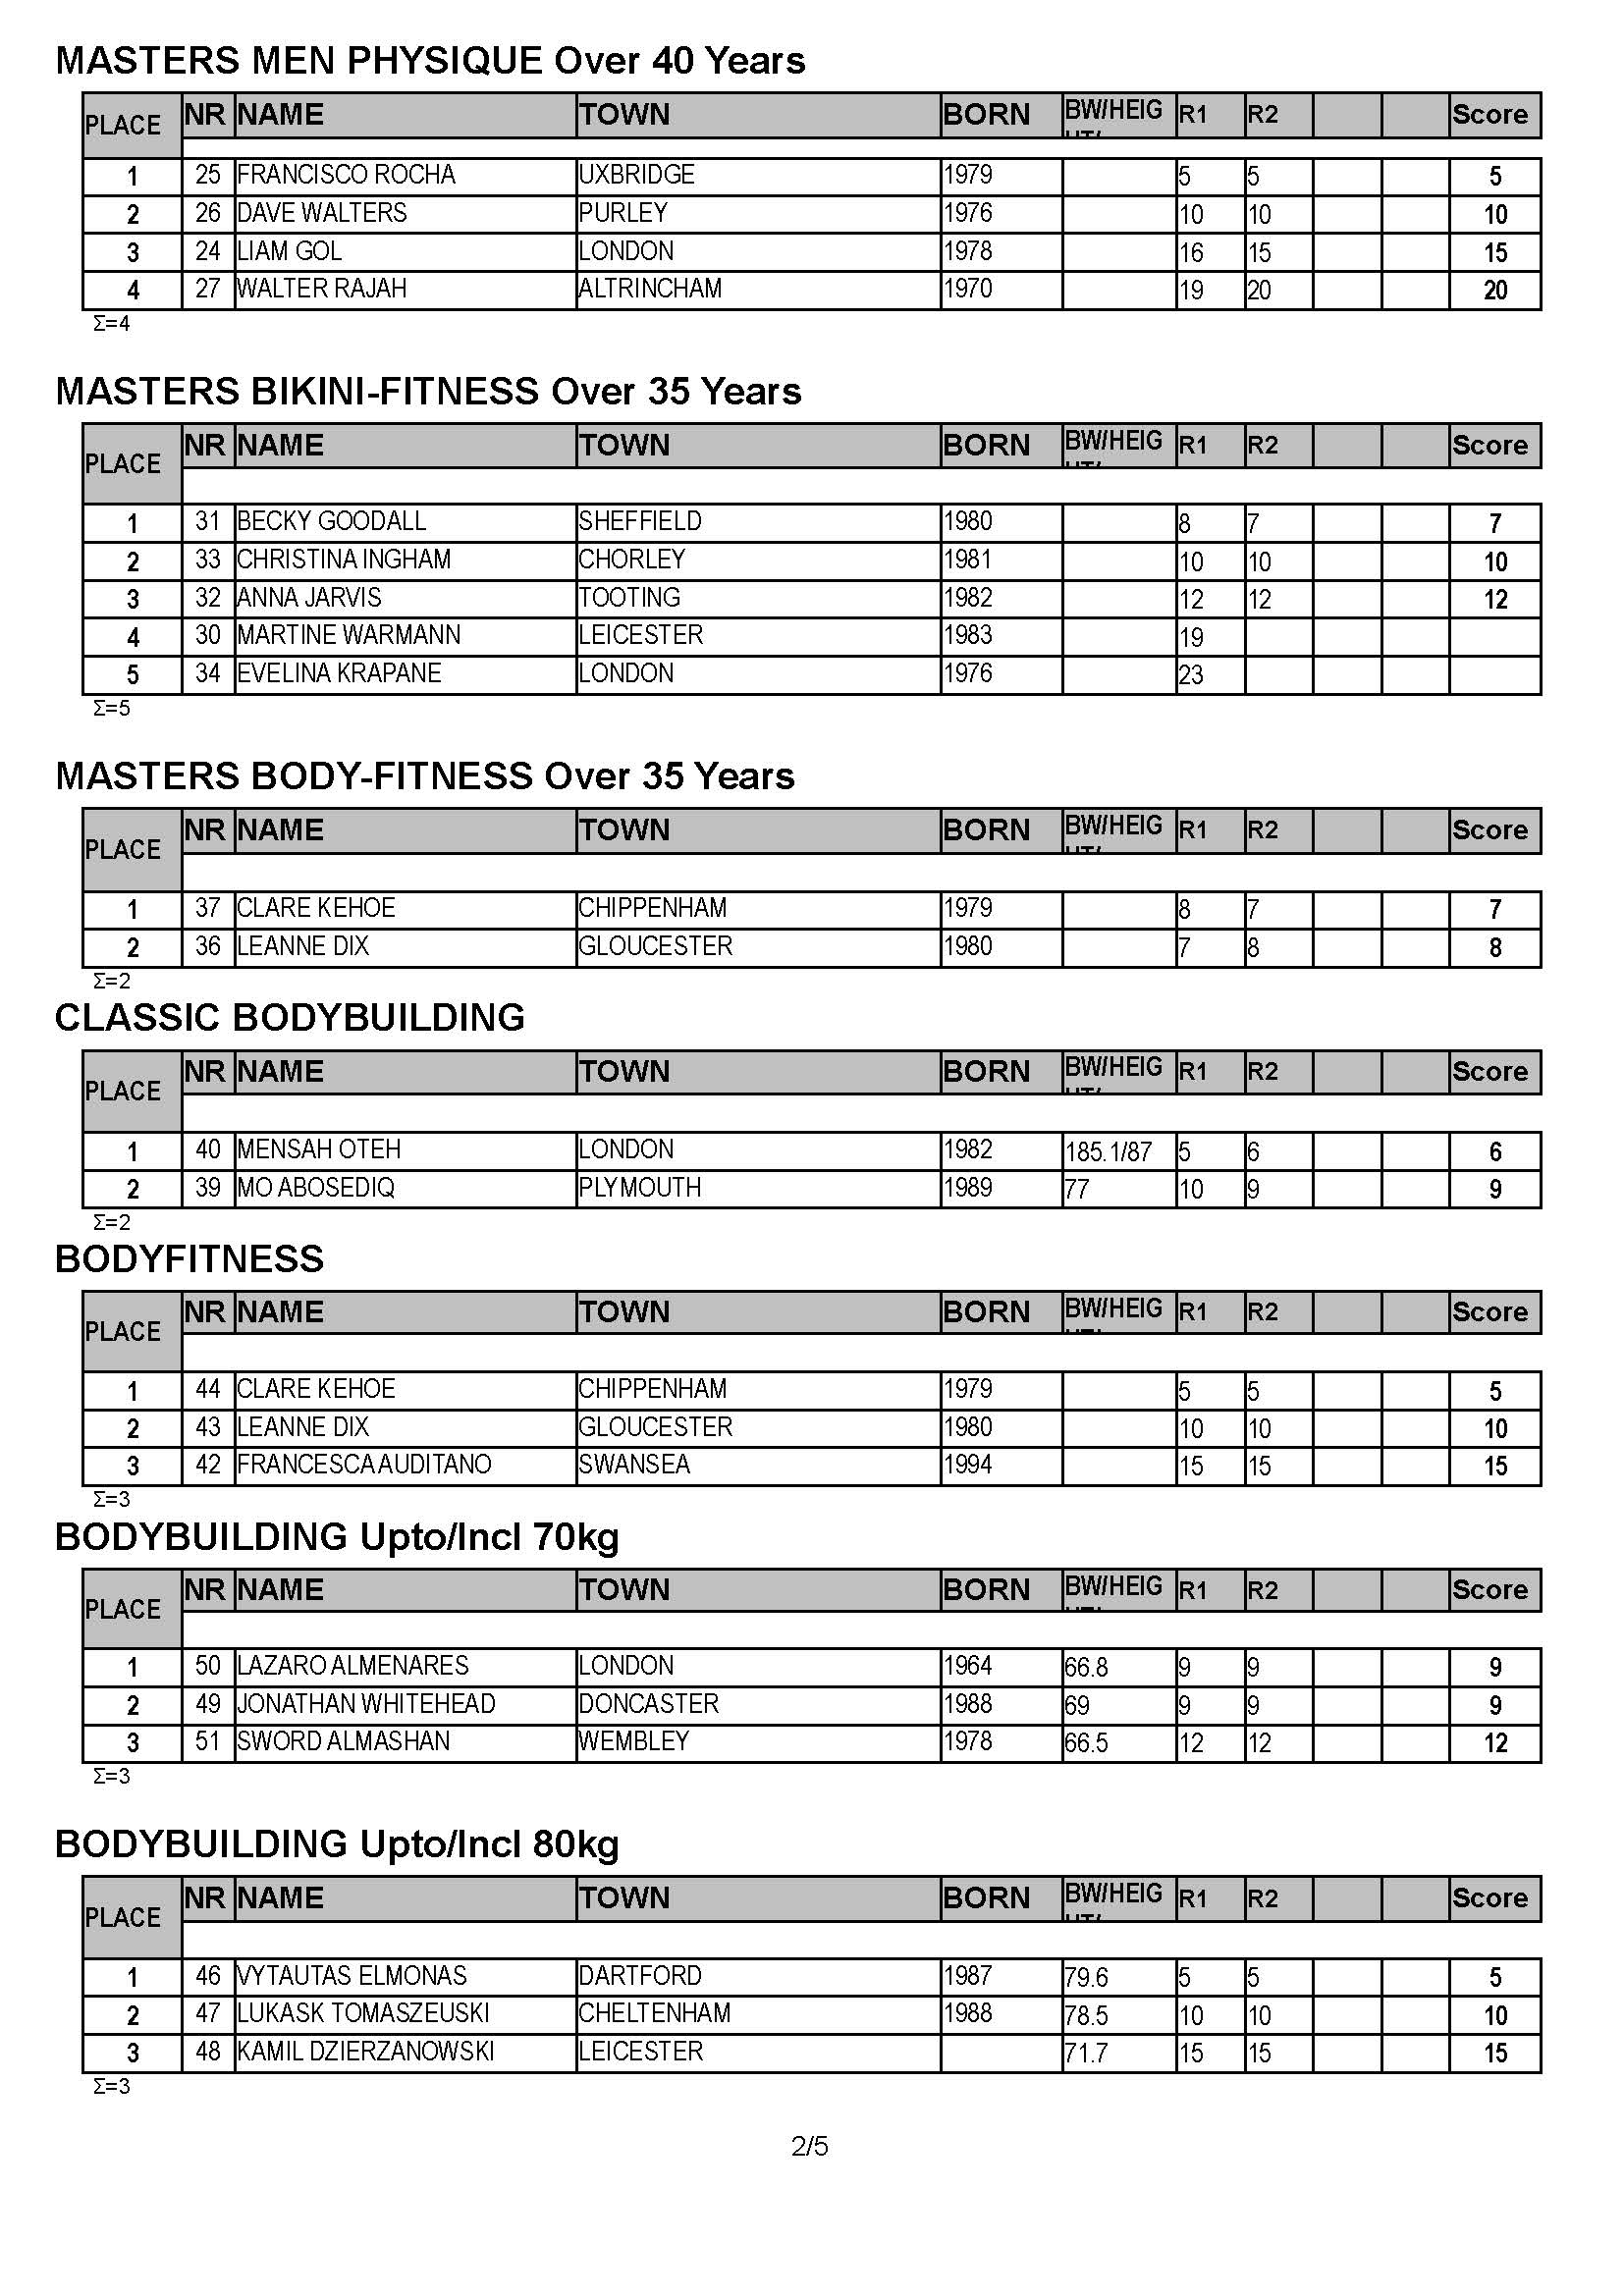 2019 UK NATIONALS RESULTS_Page_2.jpg